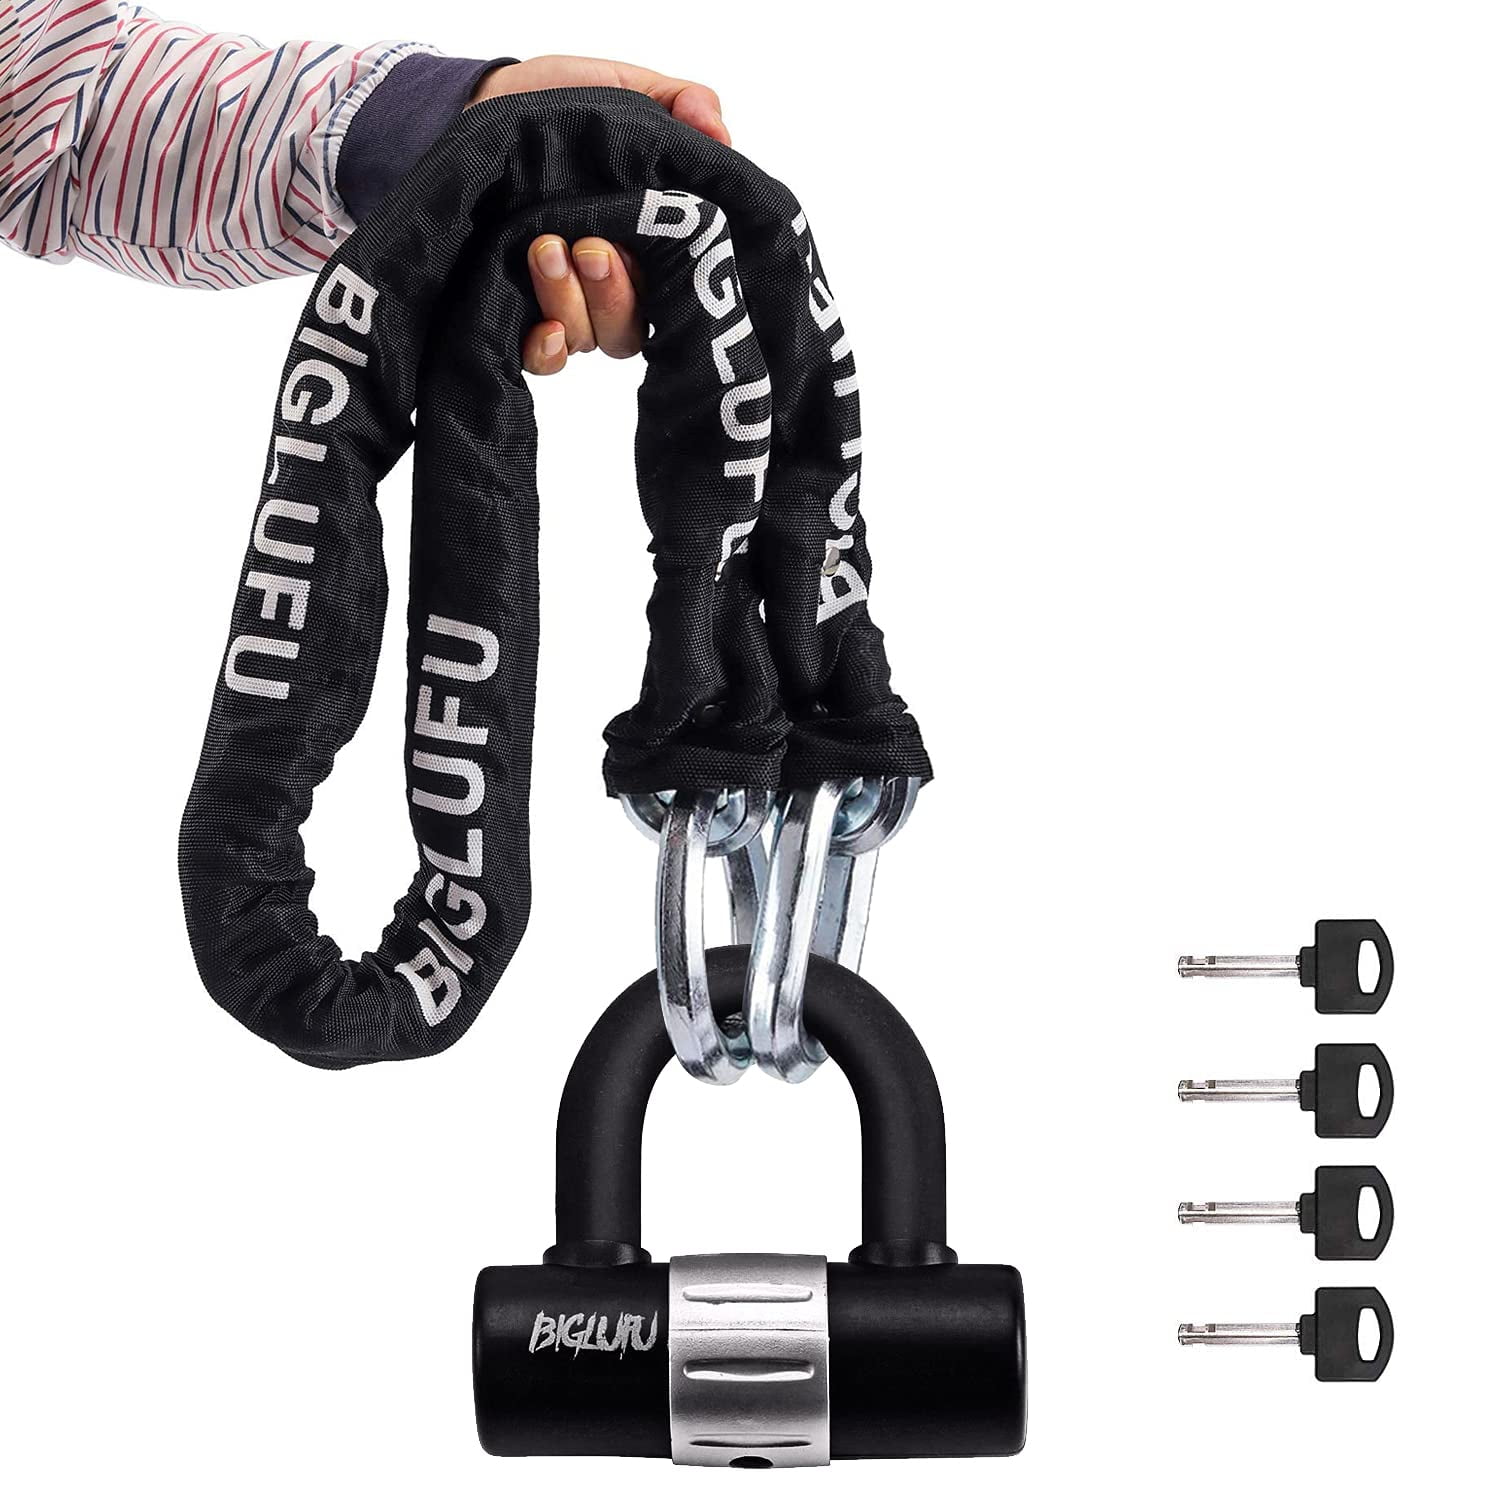 0.79/20mm Diameter BIGLUFU Bike Lock Bicycle Motorcycle Cable Chain Locks Long 5-Digit Coiled Secure Combination Combinations Heavy Duty Cables Resettable